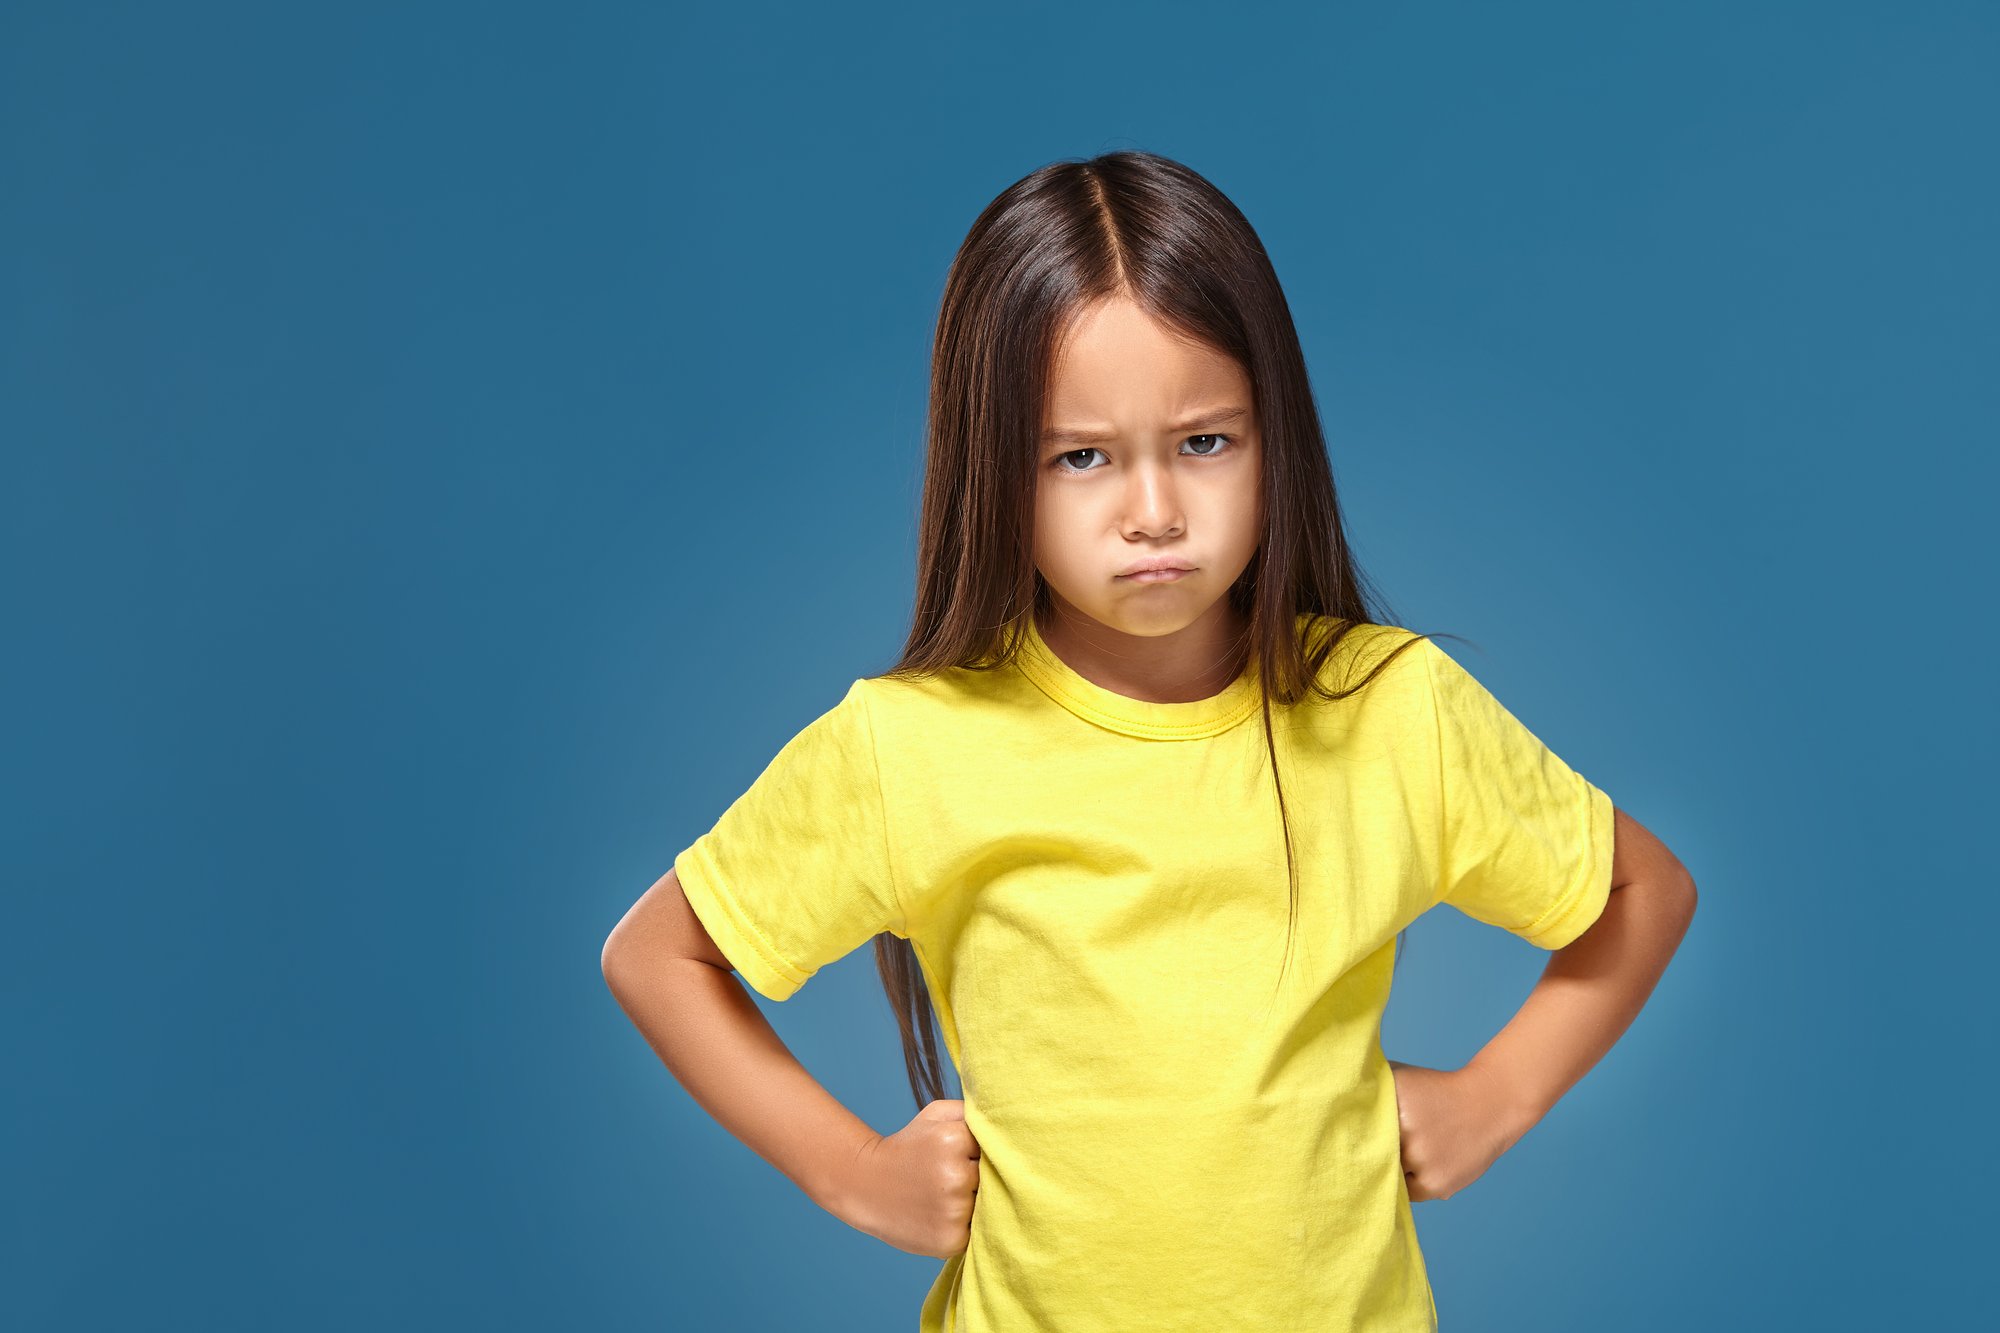 angry-little-kid-showing-frustration-disagreement-blue-background